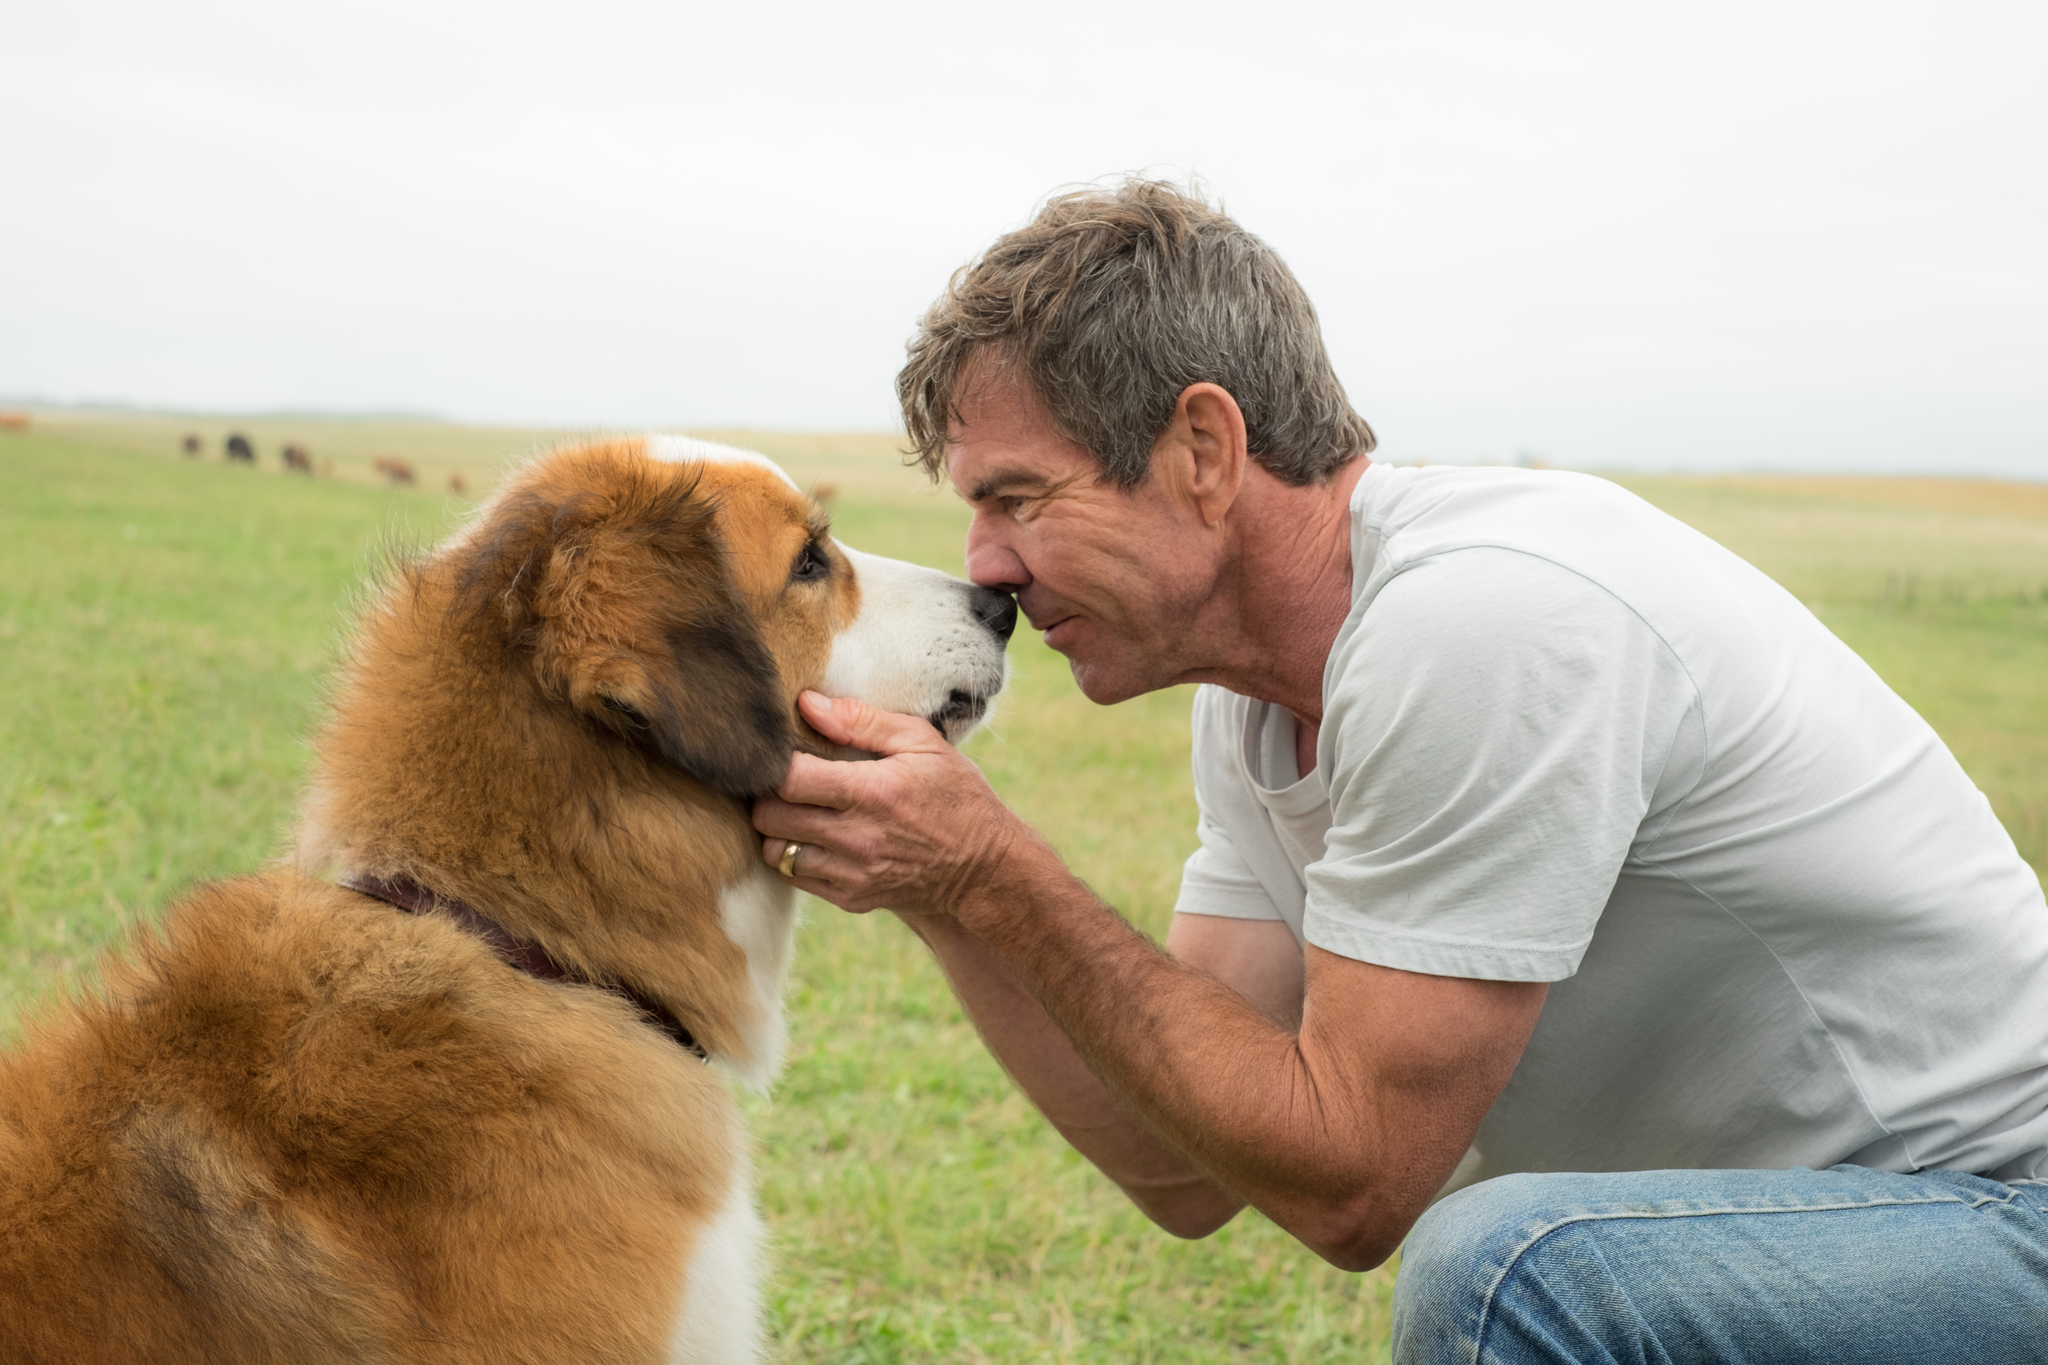 Meet The Types Of Dogs In The Movie A Dog’s Purpose